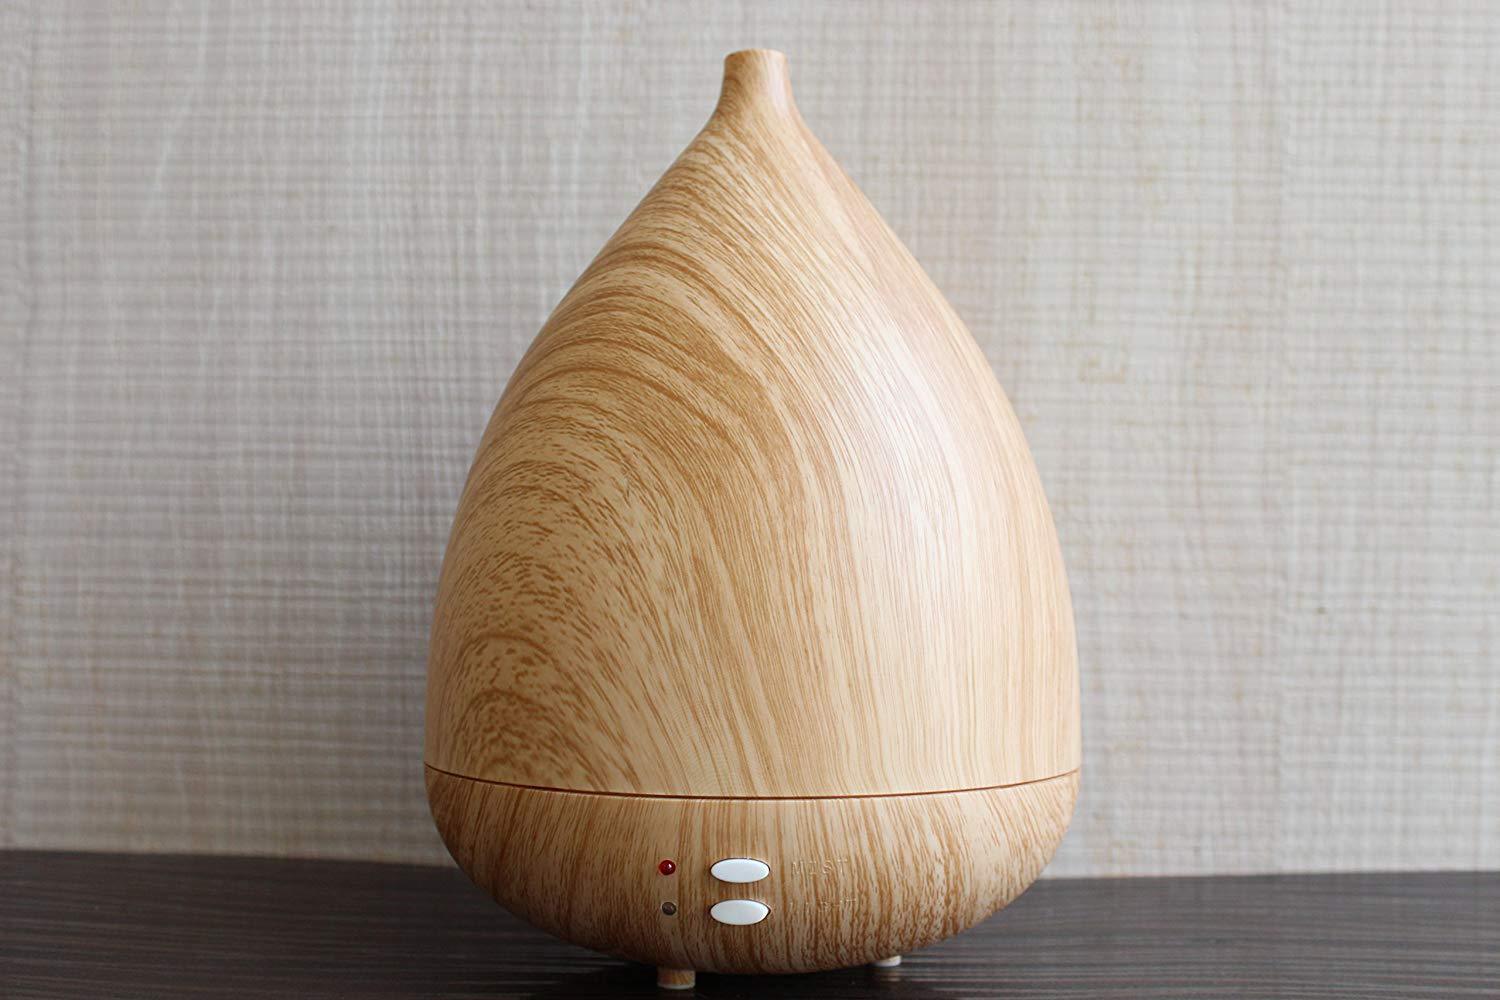 FunkyTradition 300ml Big Ultrasonic Essential Oil Aroma Diffuser, Bamboo Finish, BPA Free, Cool Mist Humidifier for Office Home Bedroom Living Room Study Yoga Spa - FunkyTradition